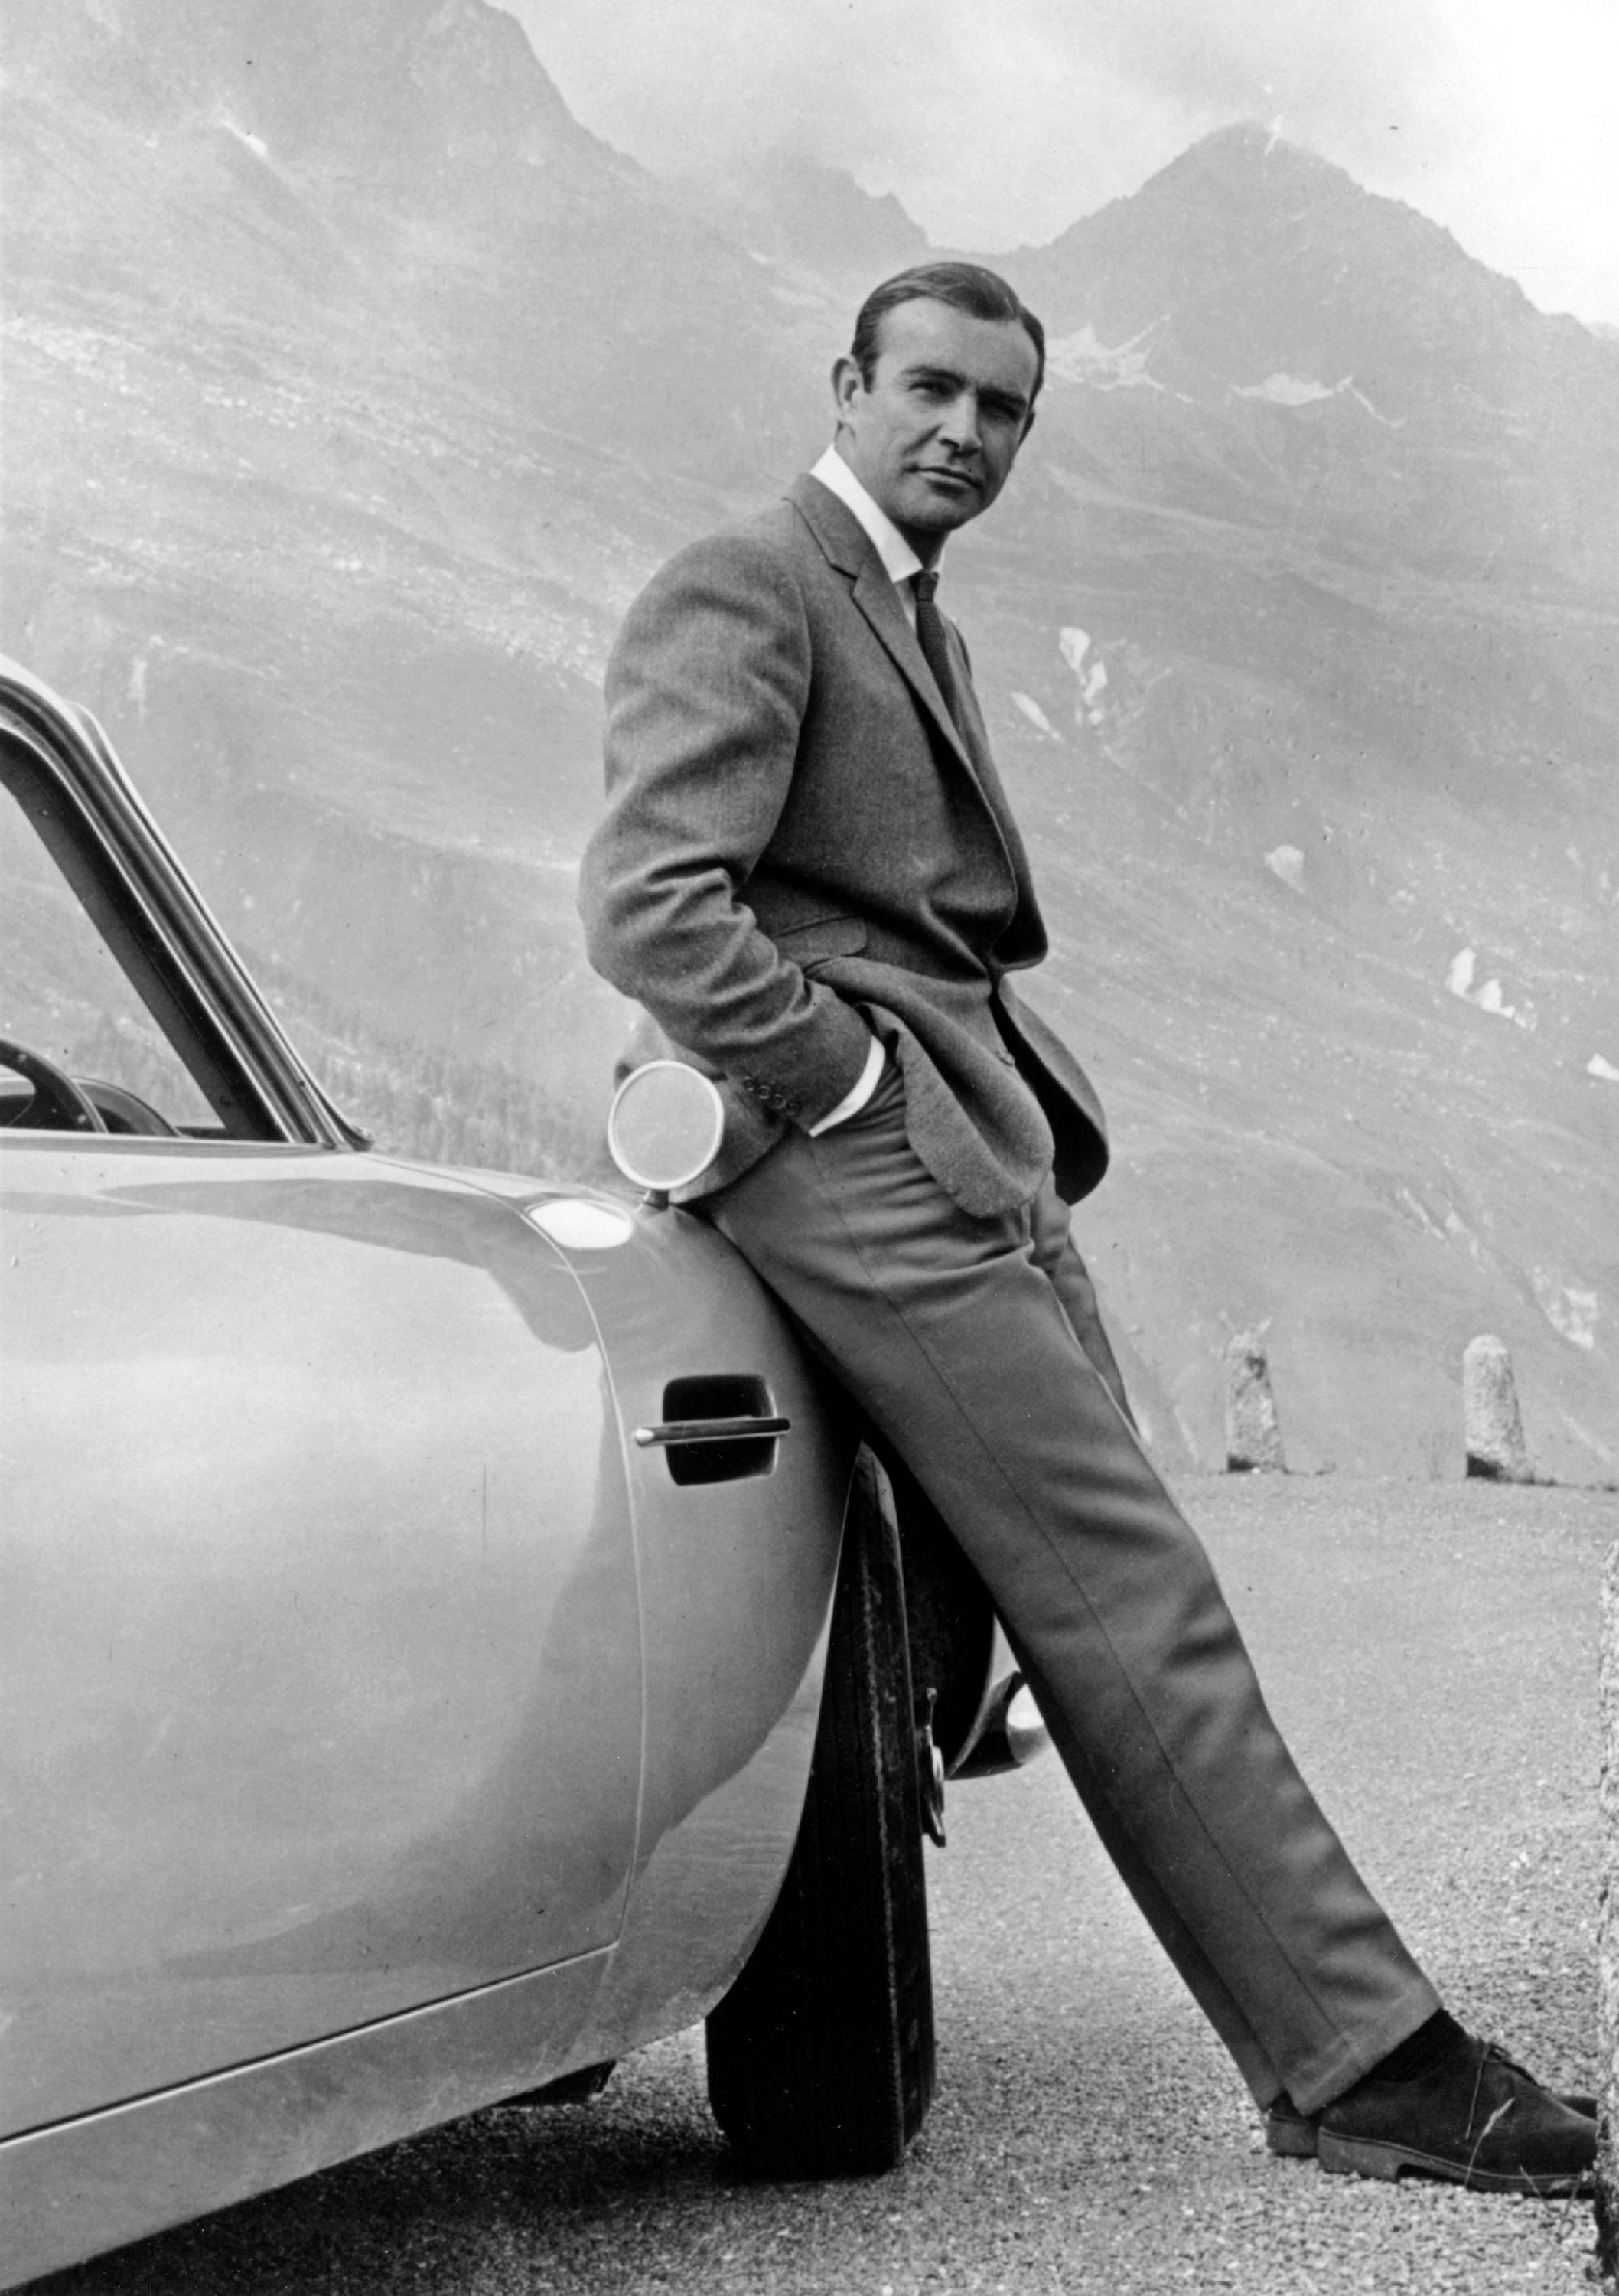 Sean Connery as James Bond in the 1964 film "Goldfinger" | Source: Getty Images